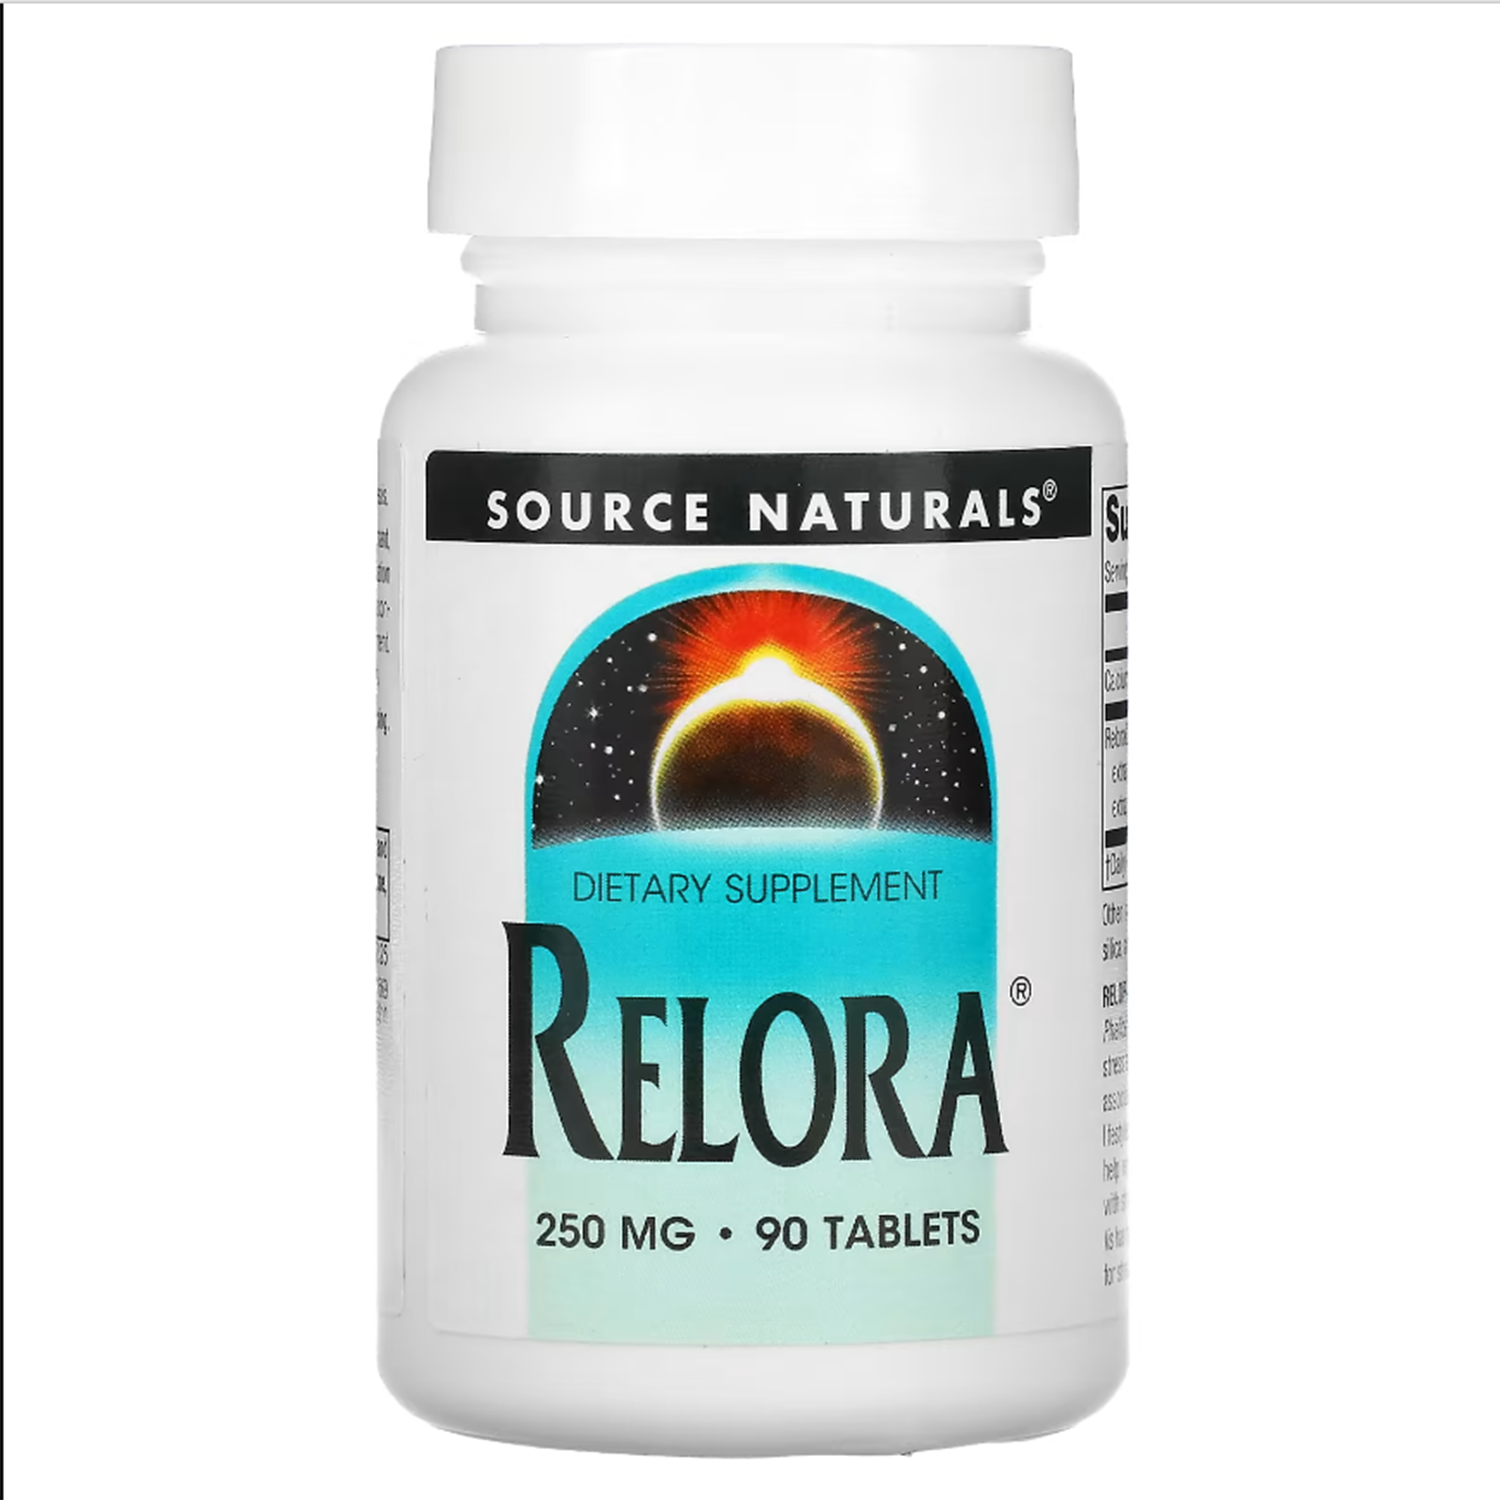 Source Naturals Relora, 90 Tablets, 250 mg